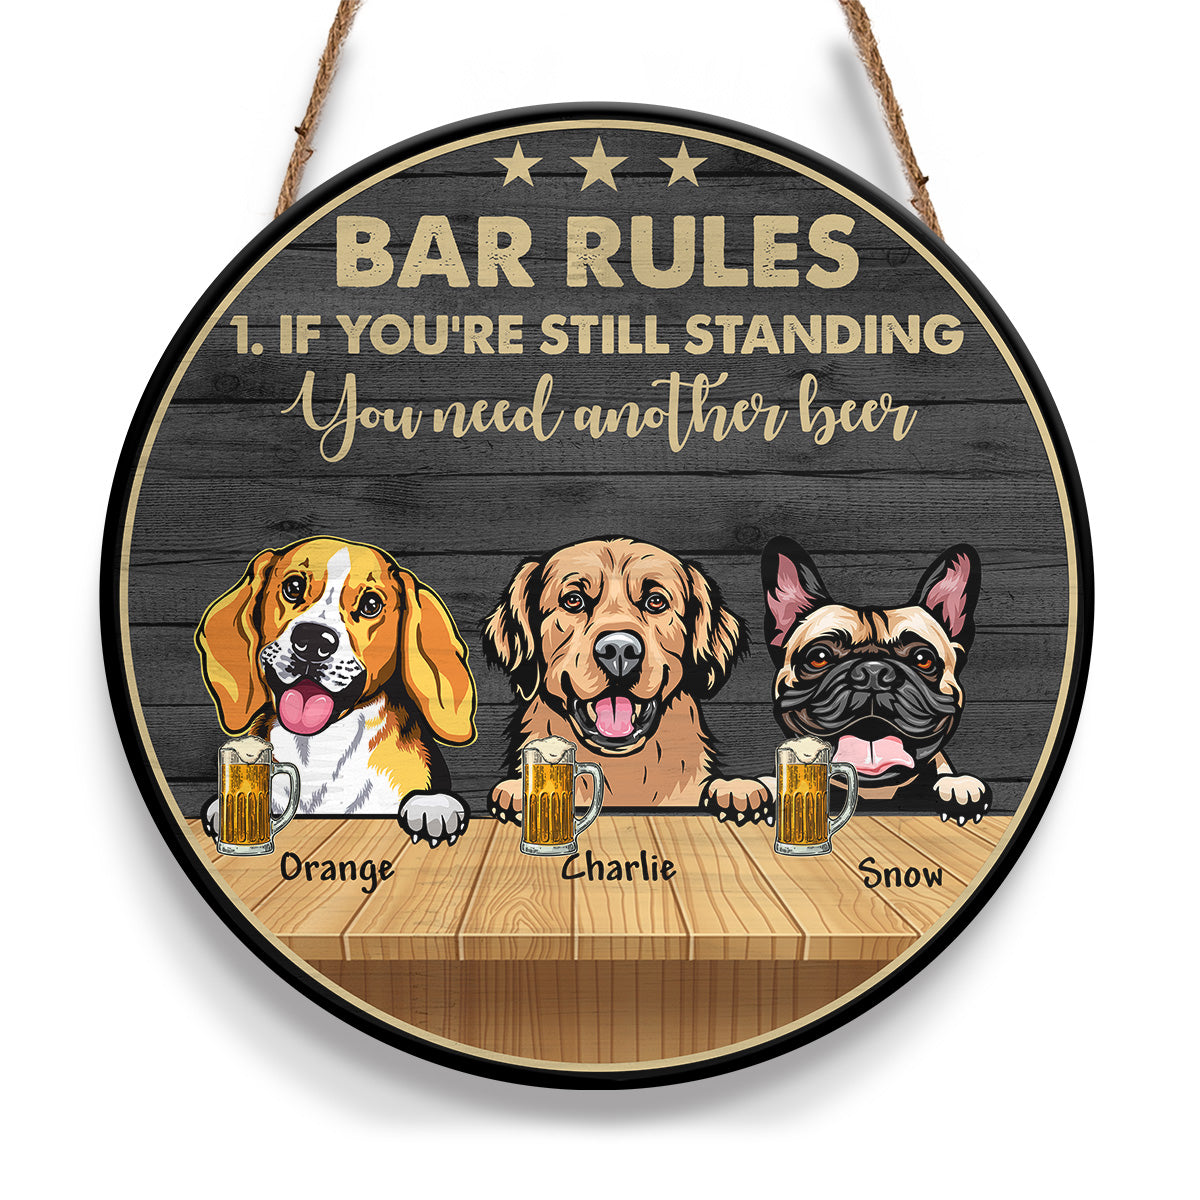 Bar Rules Dog Beer Personalizedwitch Personalized Round Wood Sign Outdoor Decor